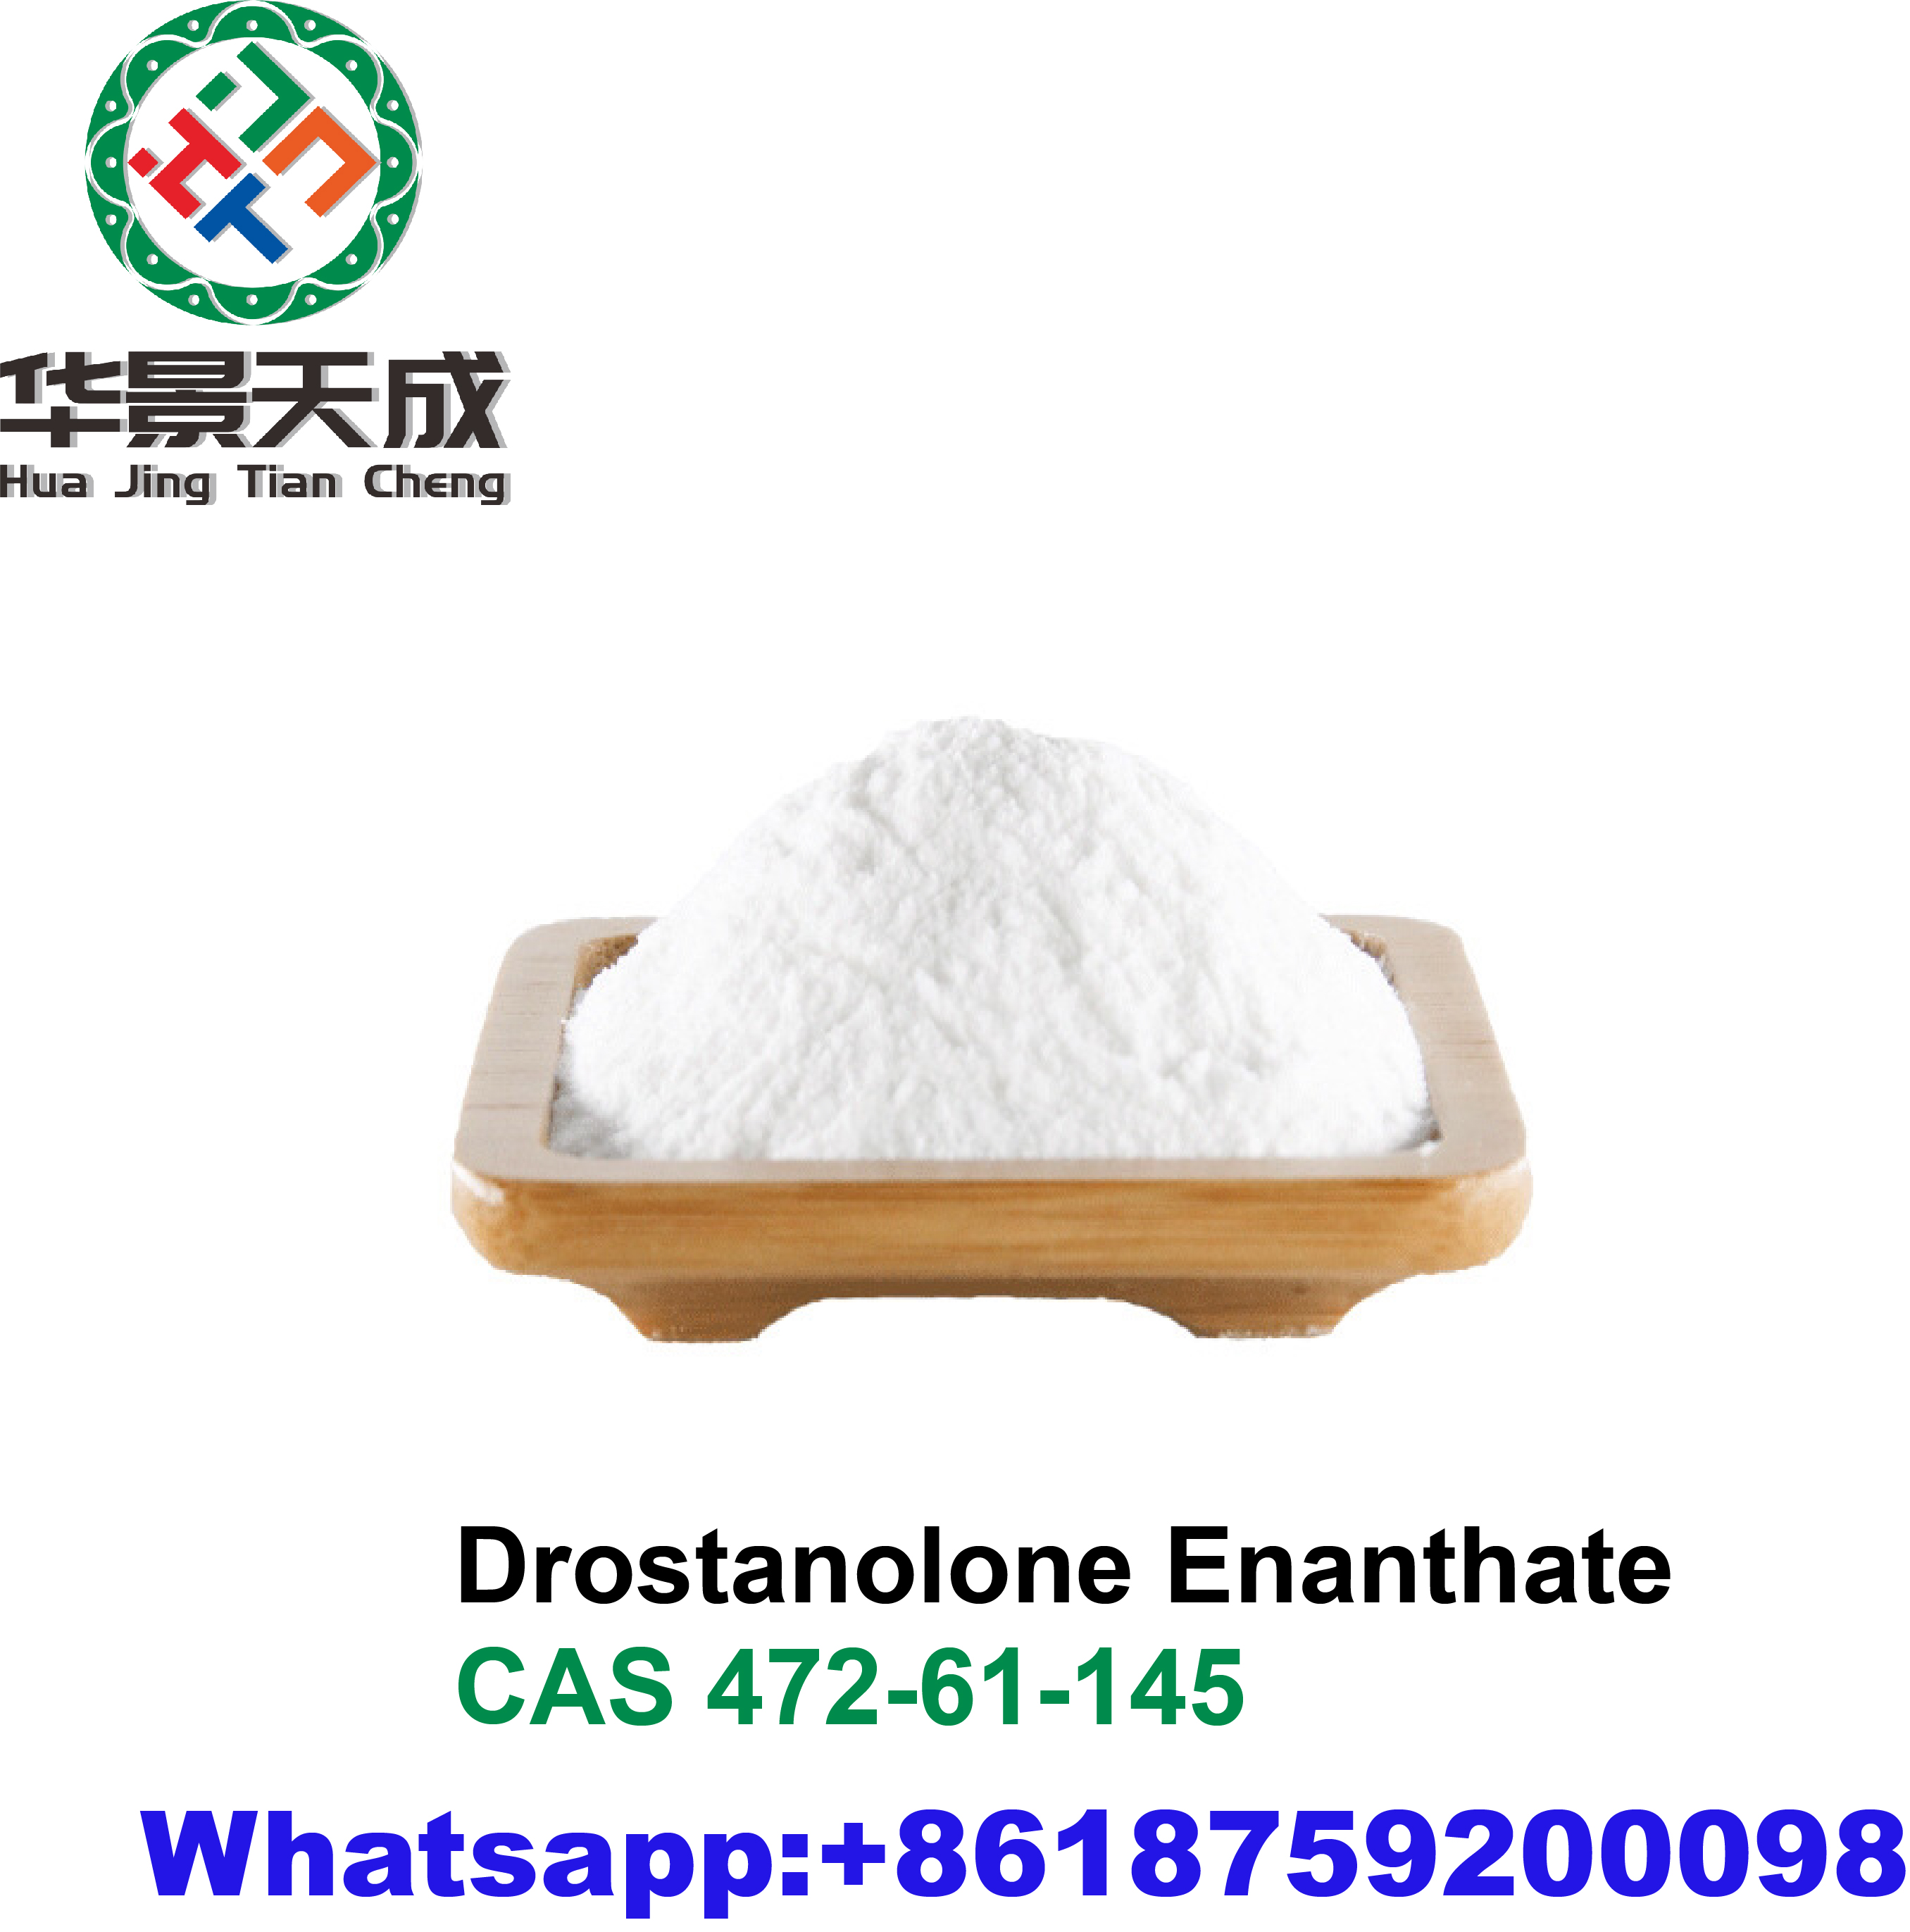 Drostanolone Enanthate CAS 472-61-145 Bulk Cycling Drolban Masteron Steroid Powder Featured Image